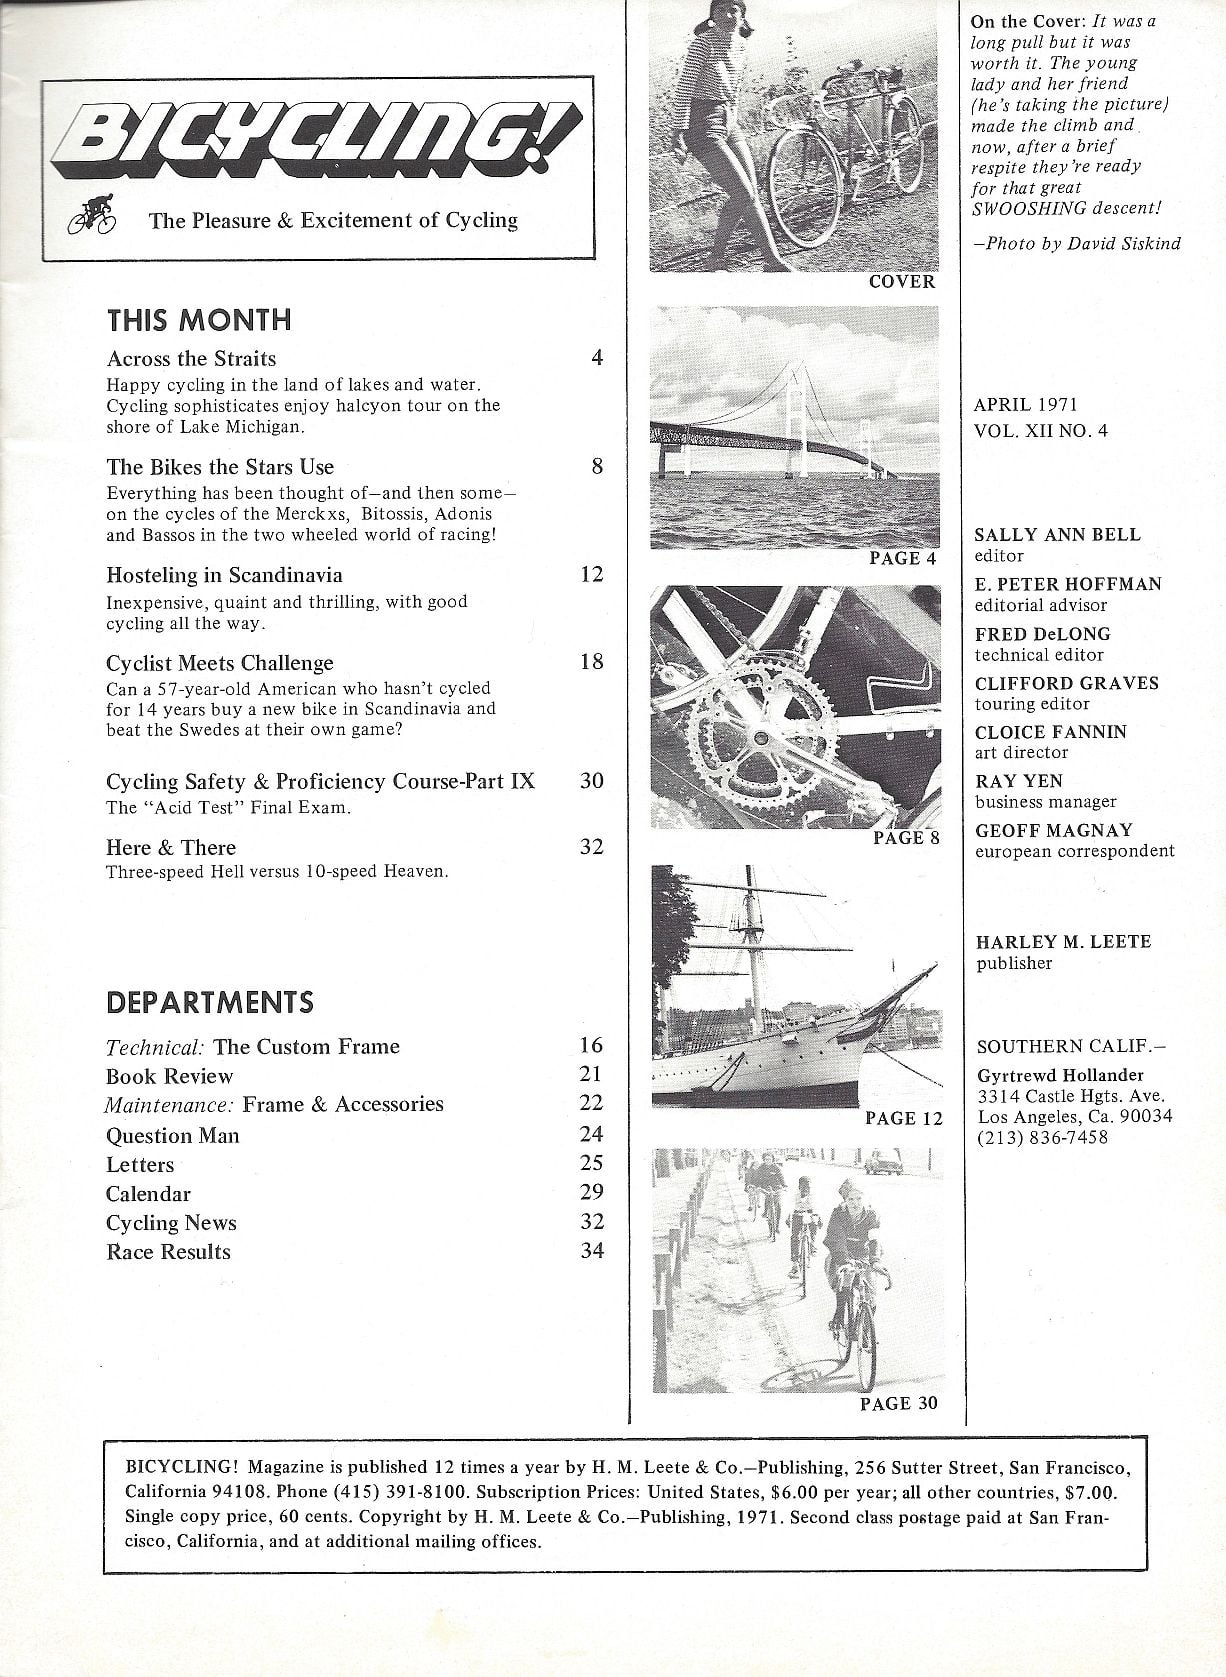 50 Years Ago: April 1971 in Bicycling! magazine - Bike Forums